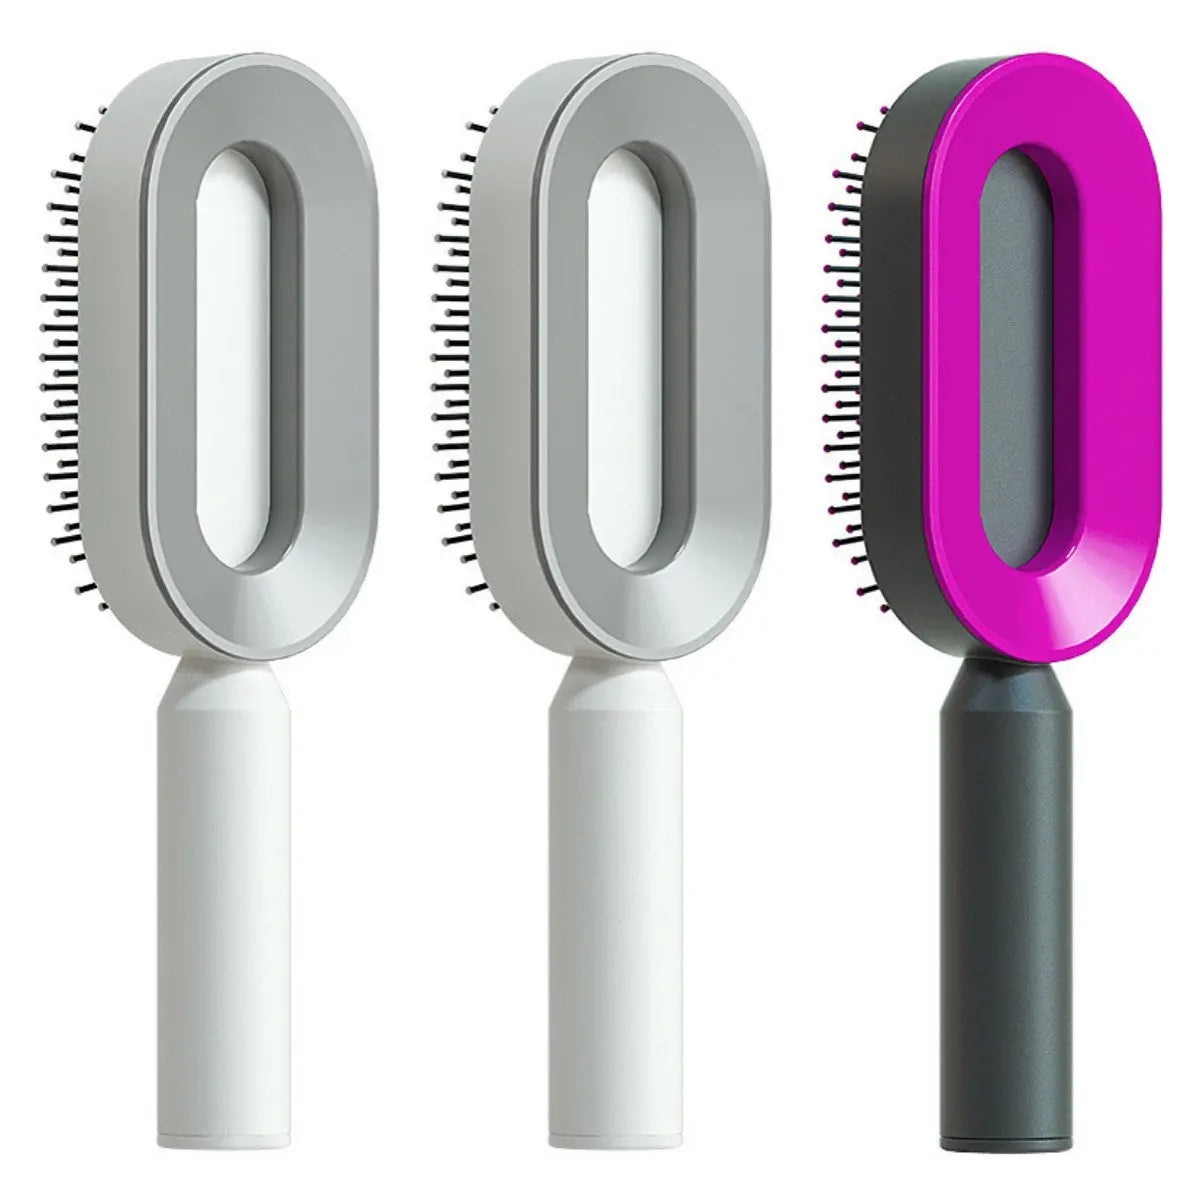 Self Cleaning Hair Brush For Women One-key Cleaning Hair Loss Airbag Massage Scalp Comb Anti-Static Hairbrush - Trending's Arena Beauty Self Cleaning Hair Brush For Women One-key Cleaning Hair Loss Airbag Massage Scalp Comb Anti-Static Hairbrush FACE Set-W